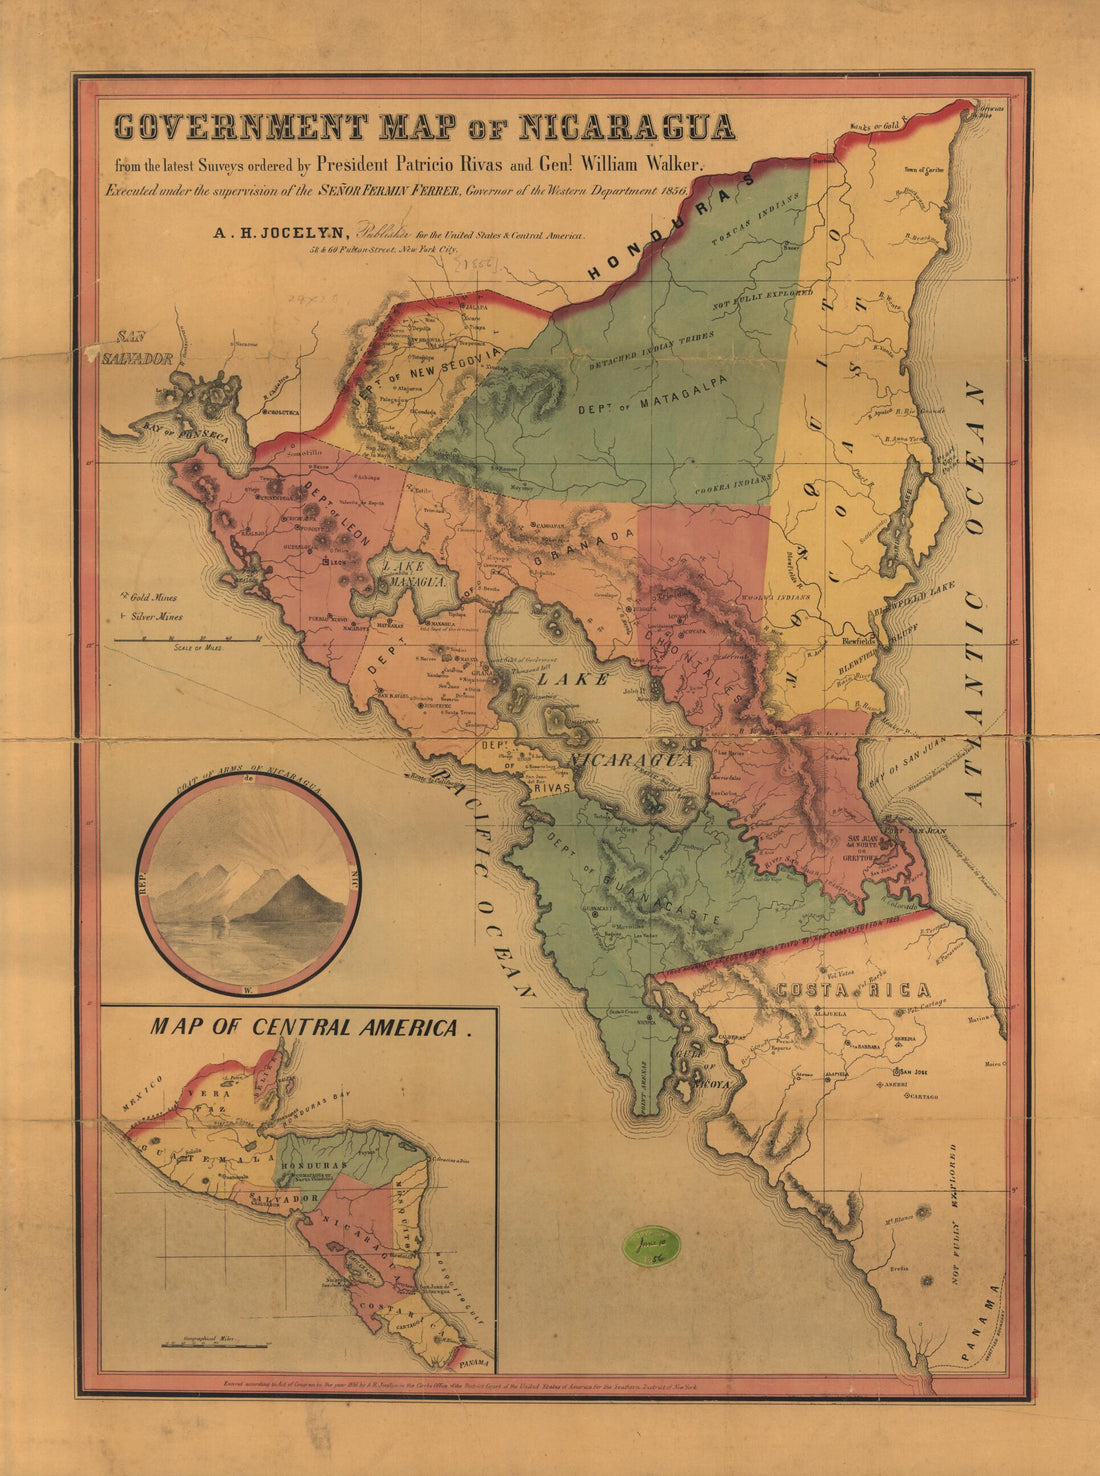 This old map of Government Map of Nicaragua : from the Latest Surveys Ordered by President Patricio Rivas and Genl. William Walker ; Executed Under the Supervision of the Señor Fermín Ferrer, Governor of the Western Department, from 1856 was created by